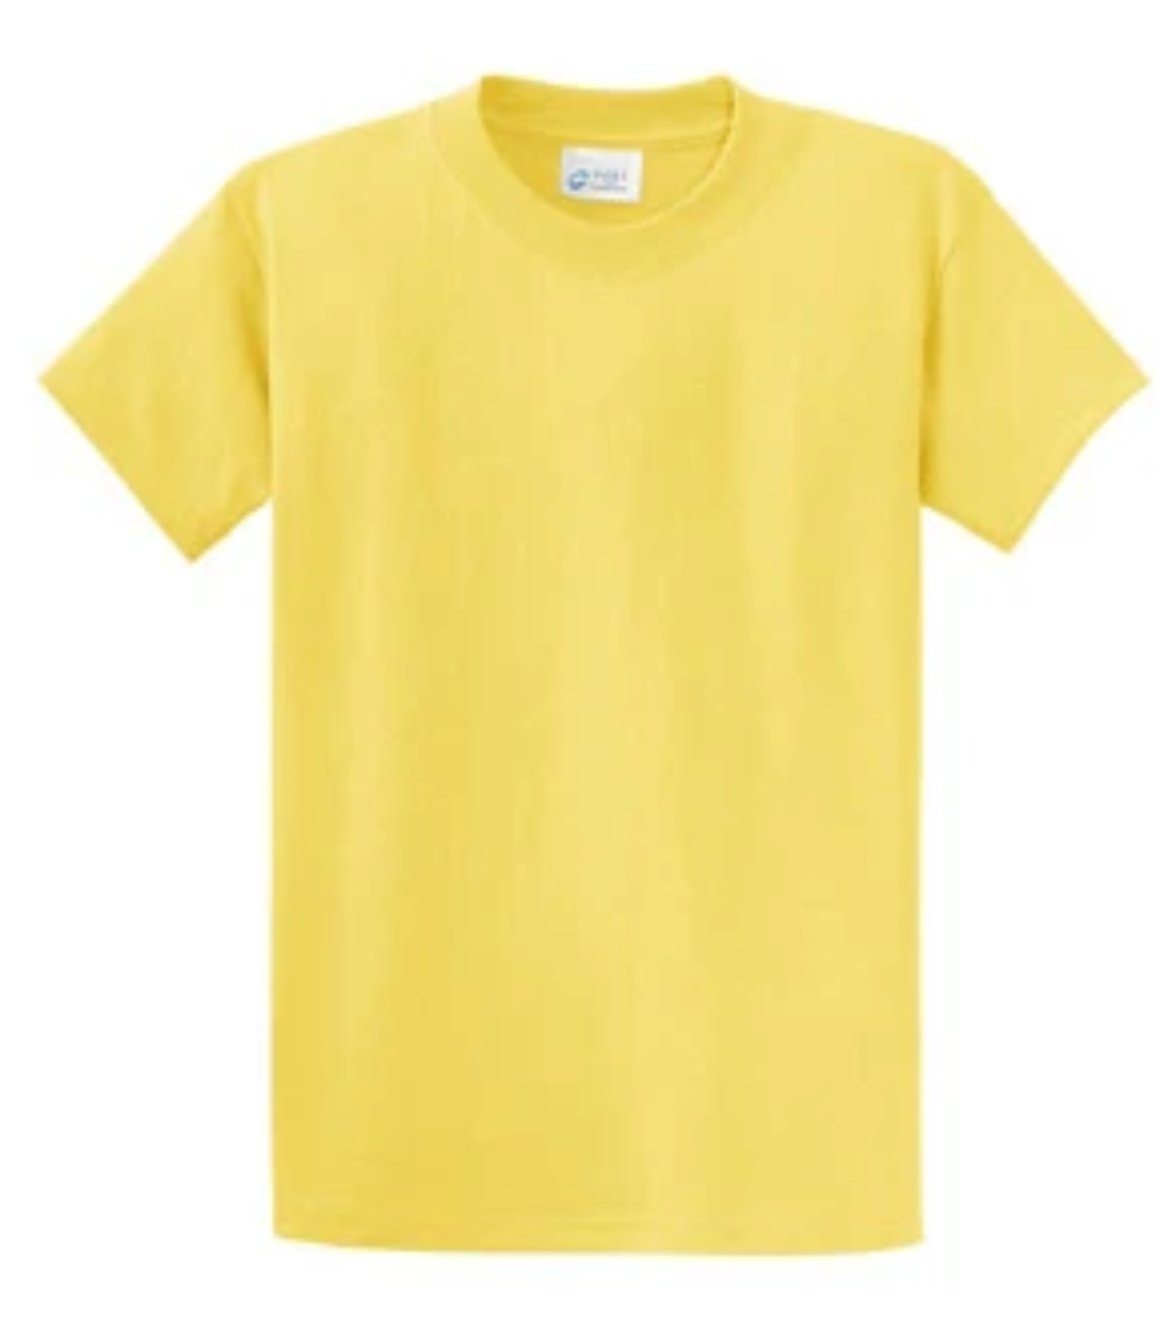 Port & Company 100% Cotton Essential T-Shirt Yellow Tall PC61T